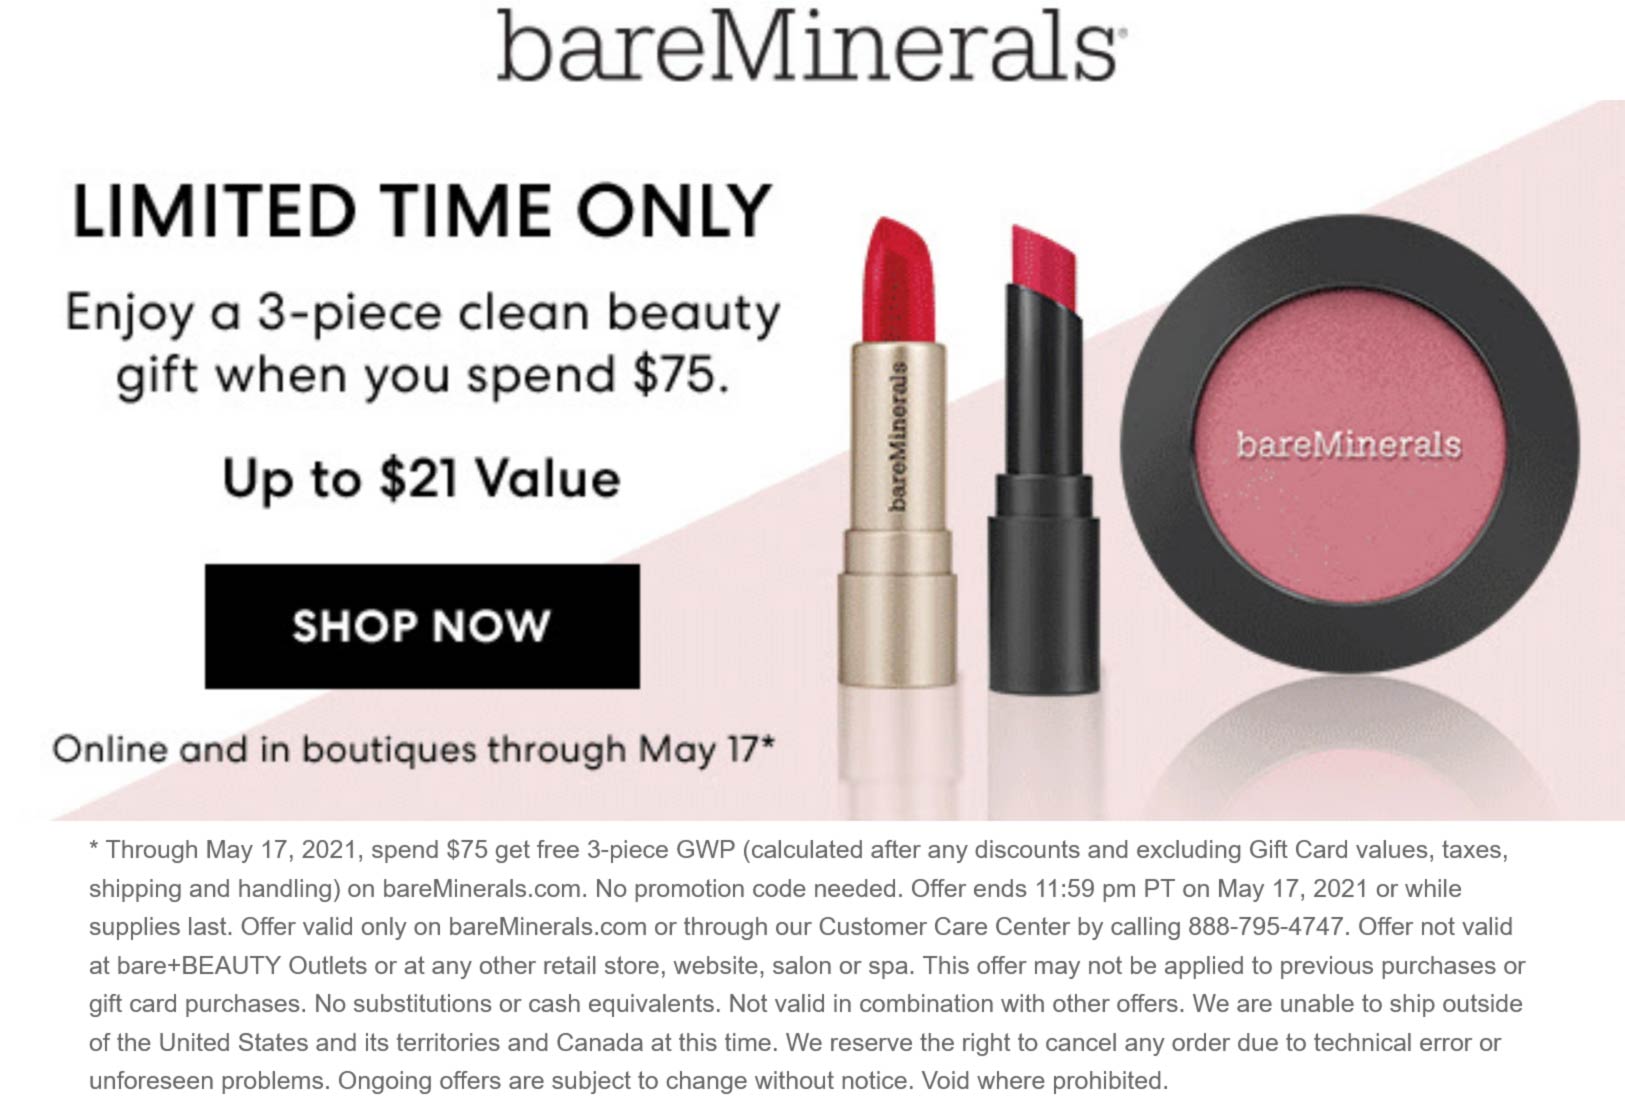 bareMinerals stores Coupon  3-pc $21 set free with $75 spent at bareMinerals, ditto online #bareminerals 